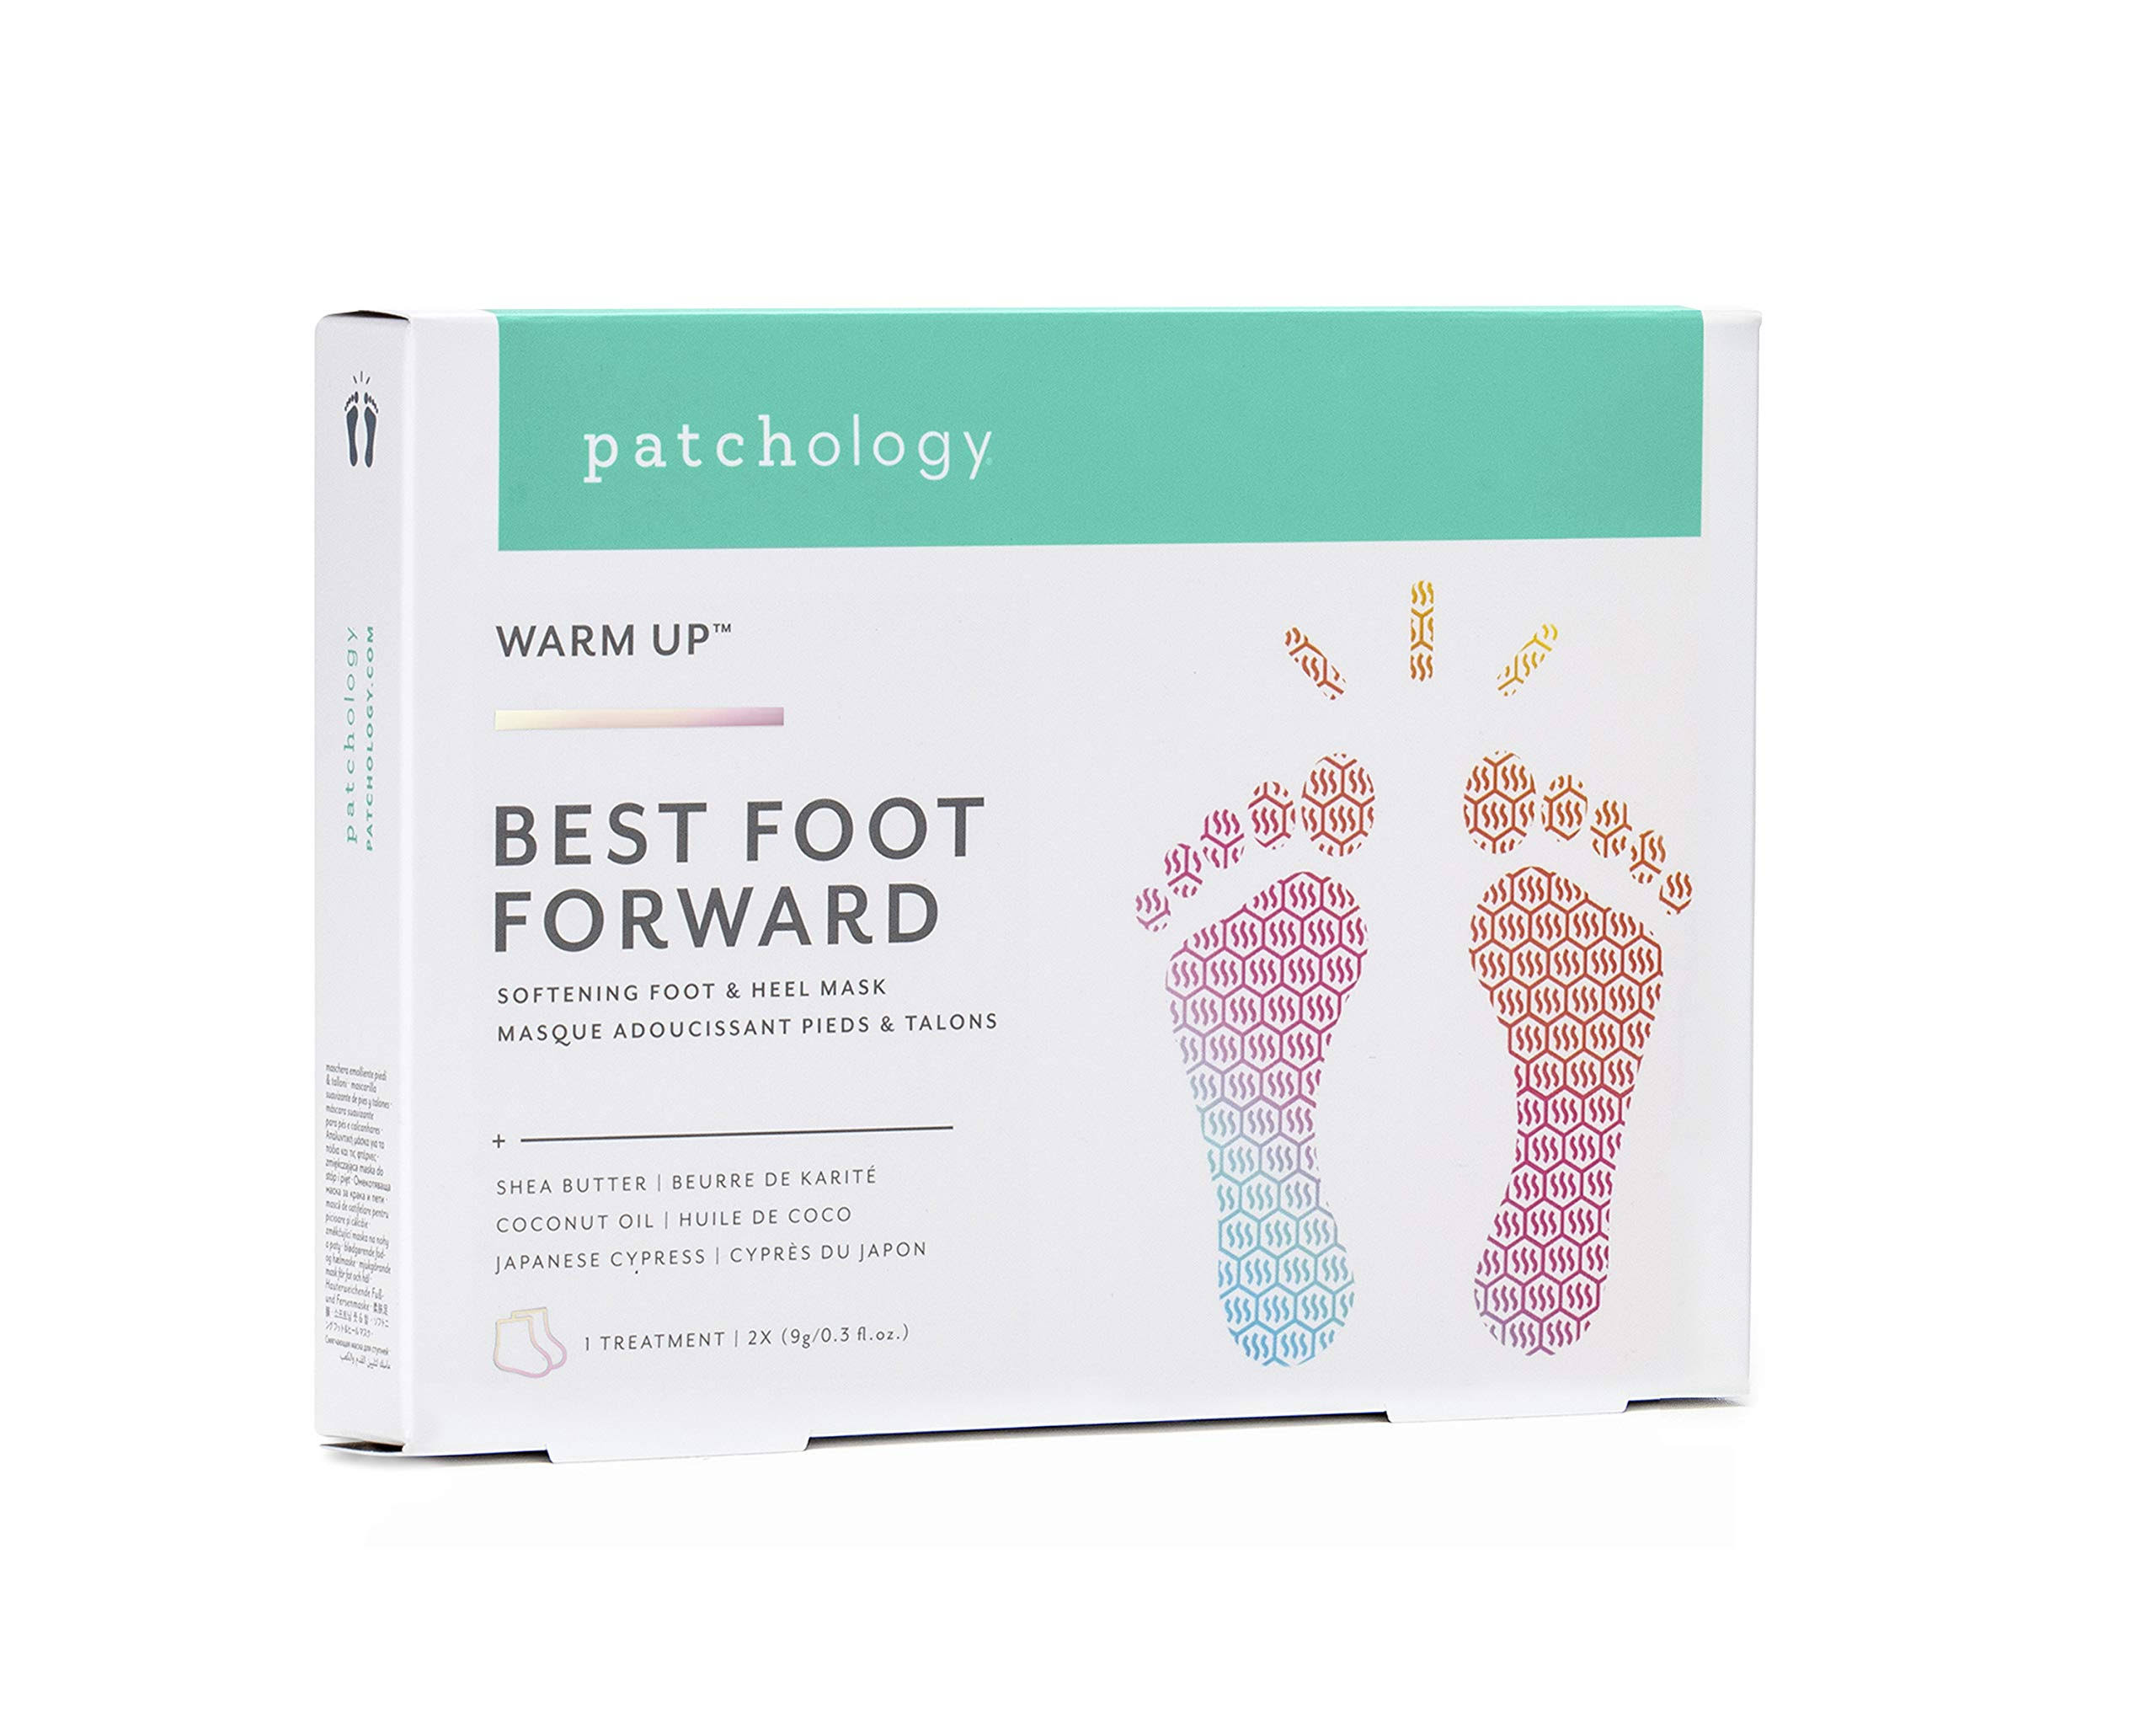 Patchology - Warm Up Best Foot Forward - Softening Foot & Heel Mask (1 Treatment)